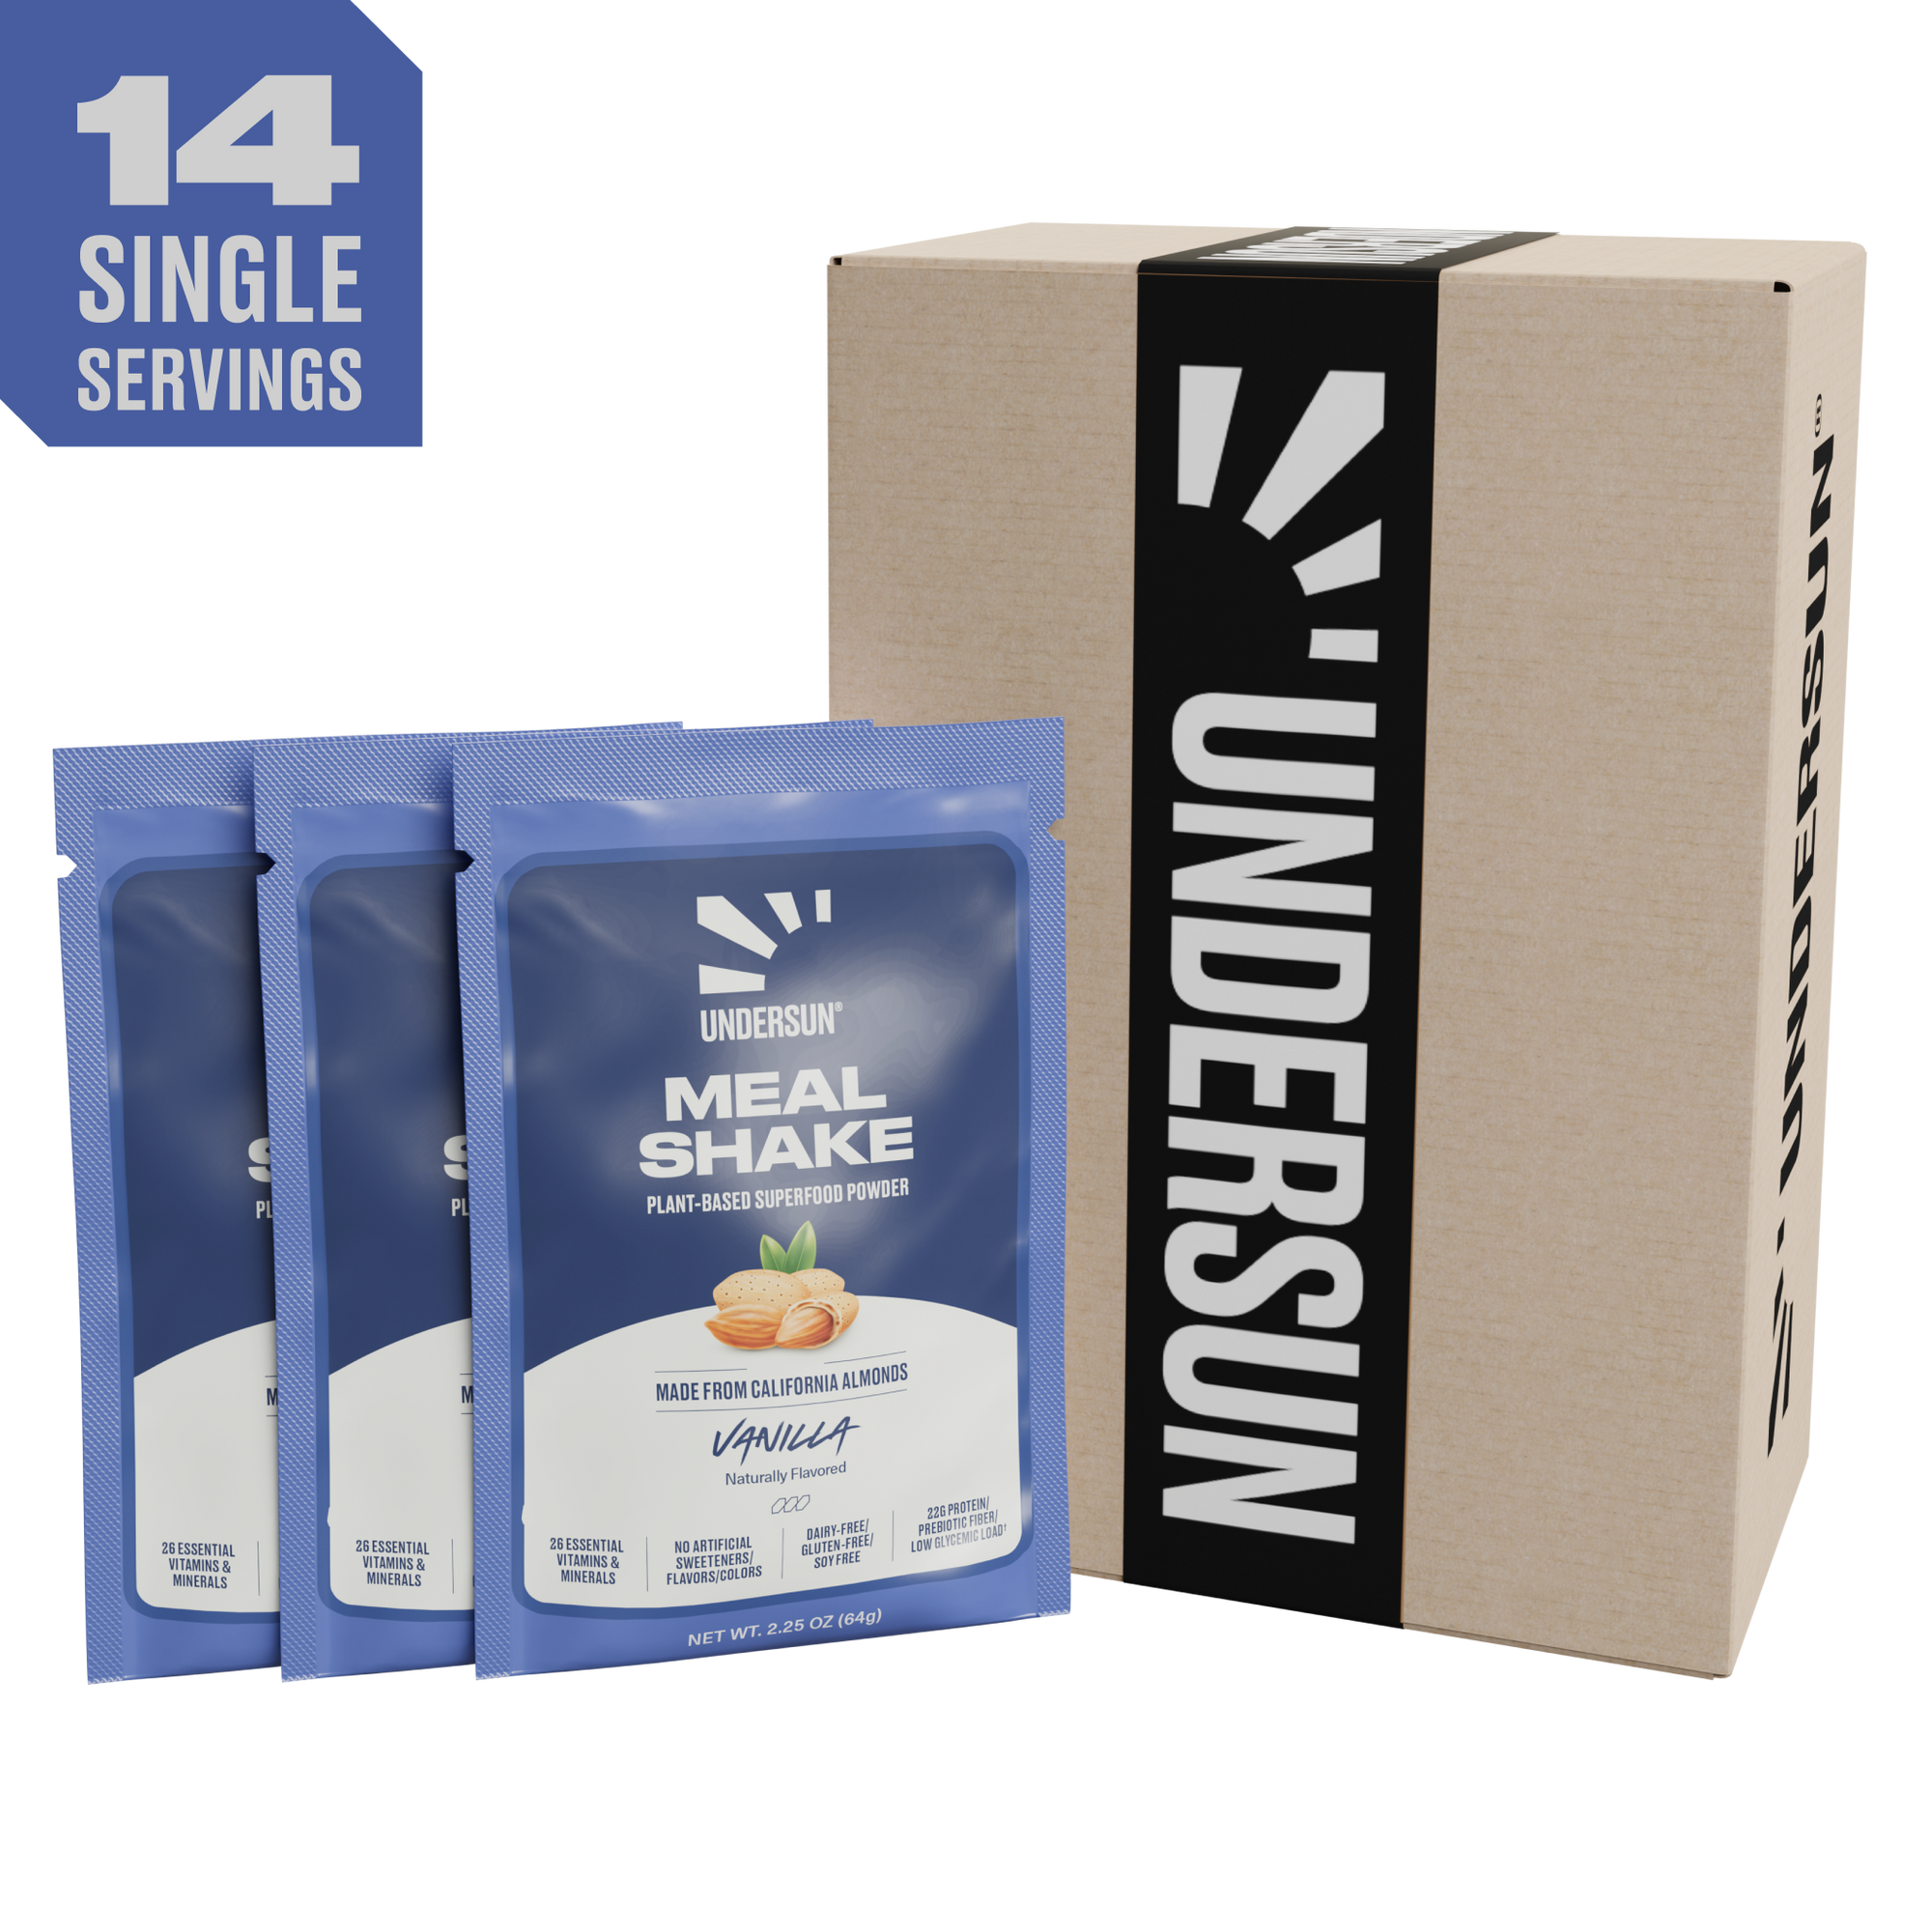 Undersun Meal Shake 14 Servings - Subscription (Test Only) - 14 Servings / Vanilla - Undersun Fitness 